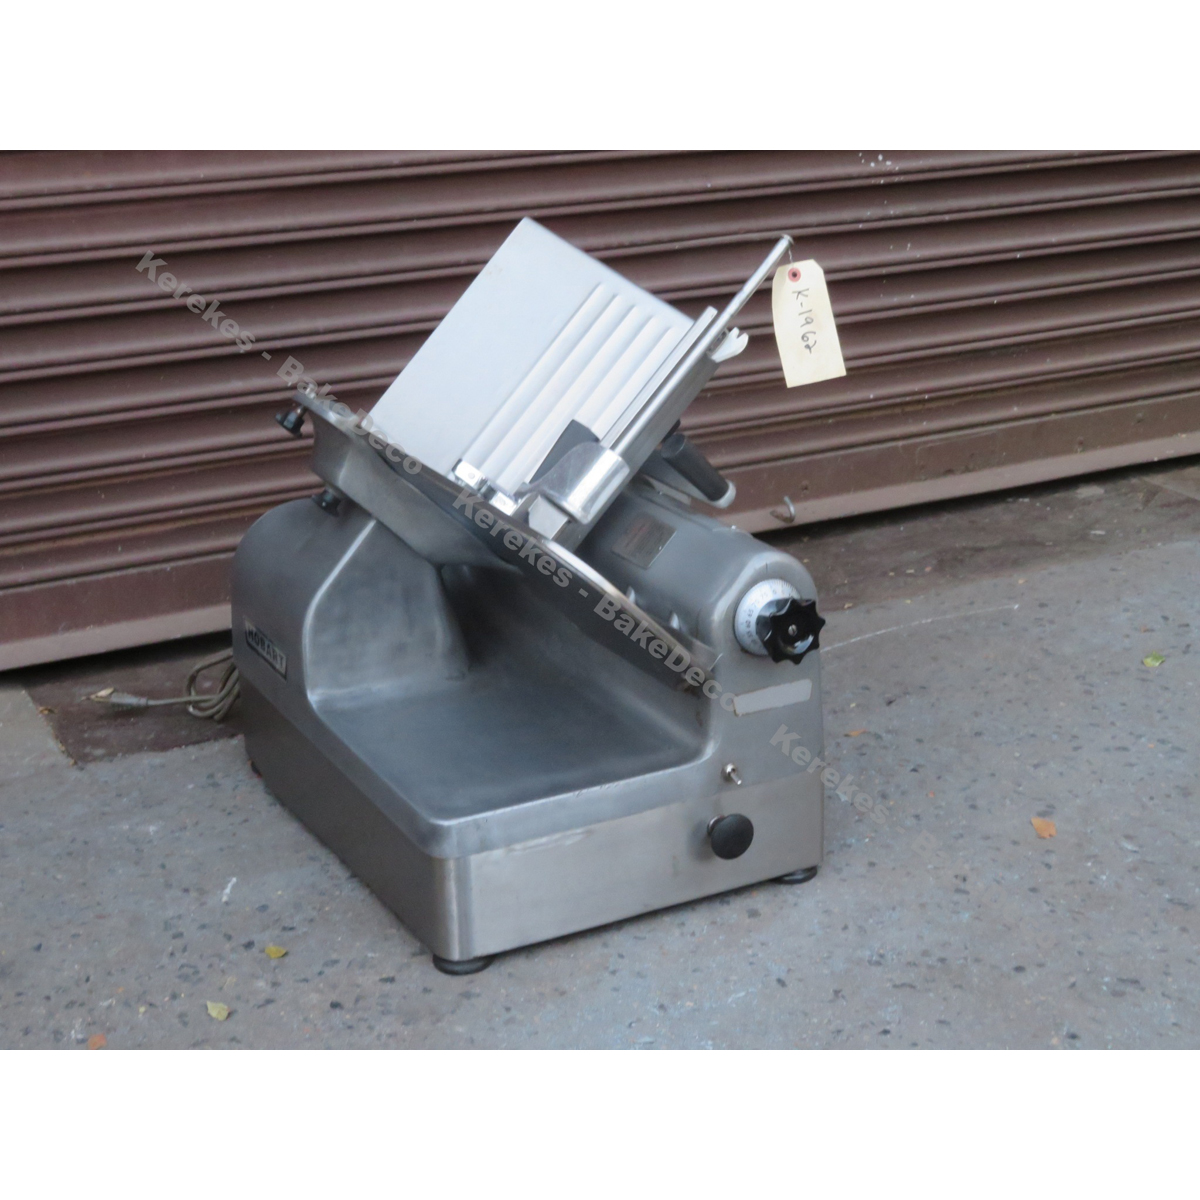 Hobart Meat Slicer 1712, Used Excellent Condition